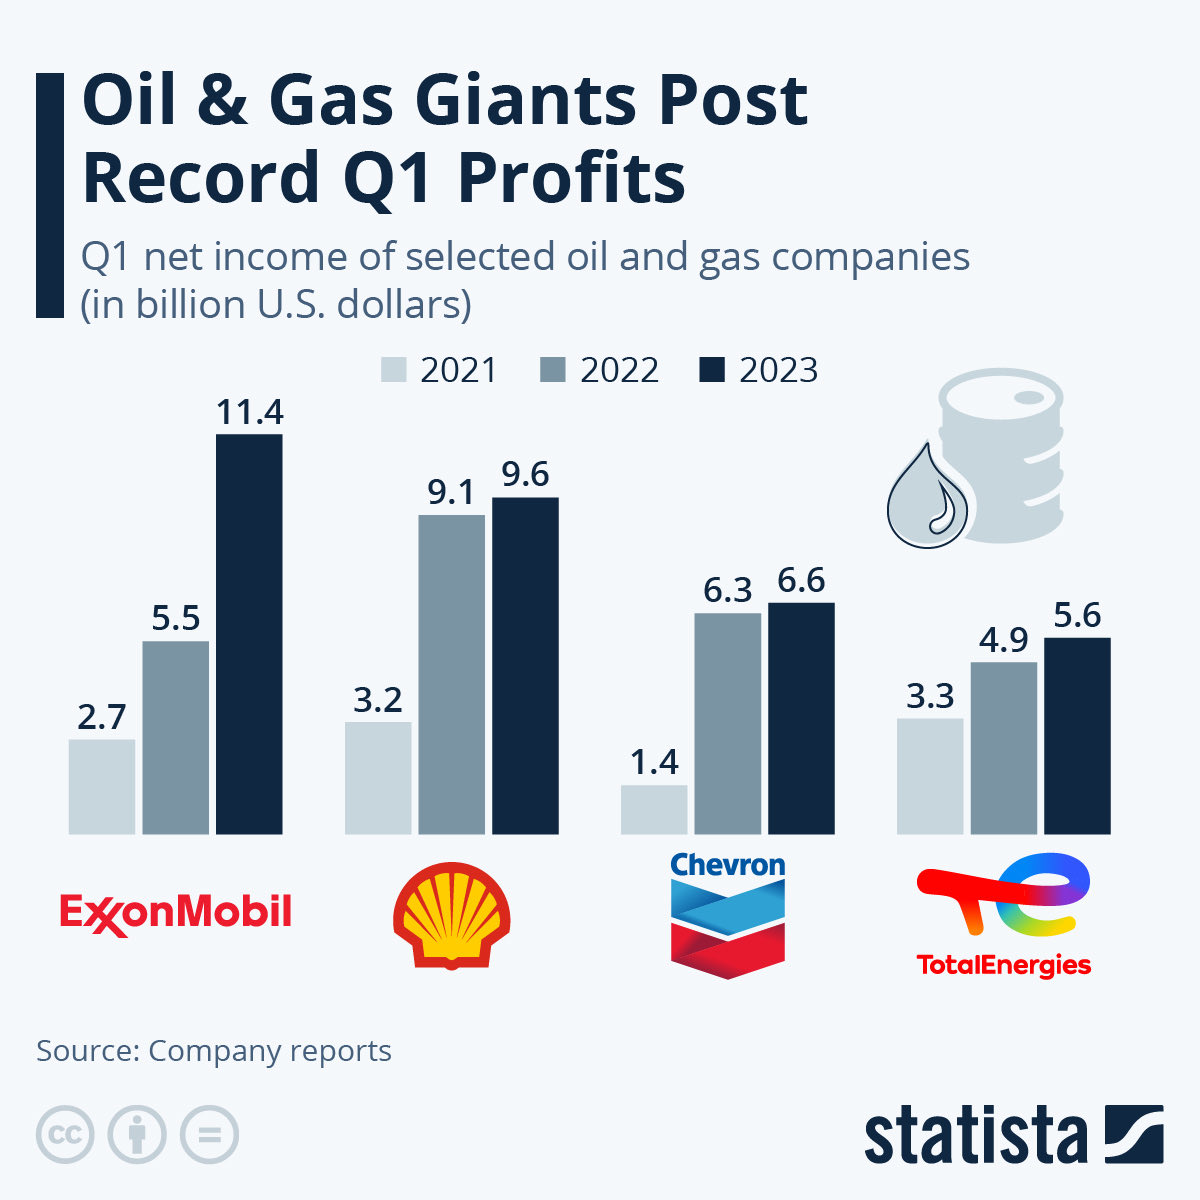 @DiPasqualeDeb @GrandpaDennisP We will never see gas below 3.00 again, bc it was always the end game, just like back in the 70s when they manufactured an oil crisis to take watergate off the front page and drive the price of gas to over 1.00/gal. This is what they do to inc profits. They are profanely greedy